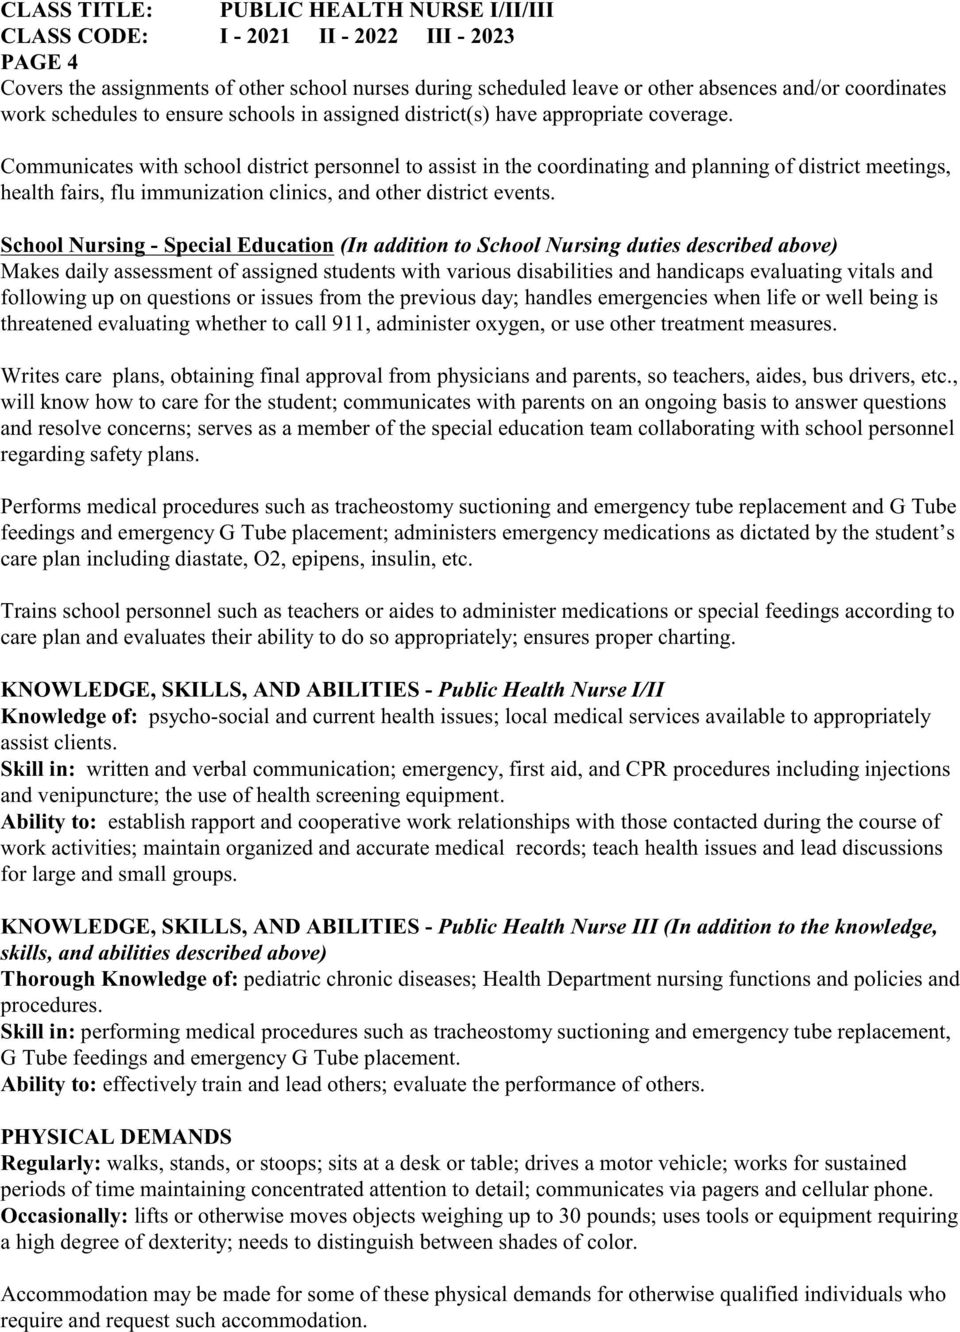 School Nursing - Special Education (In addition to School Nursing duties described above) Makes daily assessment of assigned students with various disabilities and handicaps evaluating vitals and